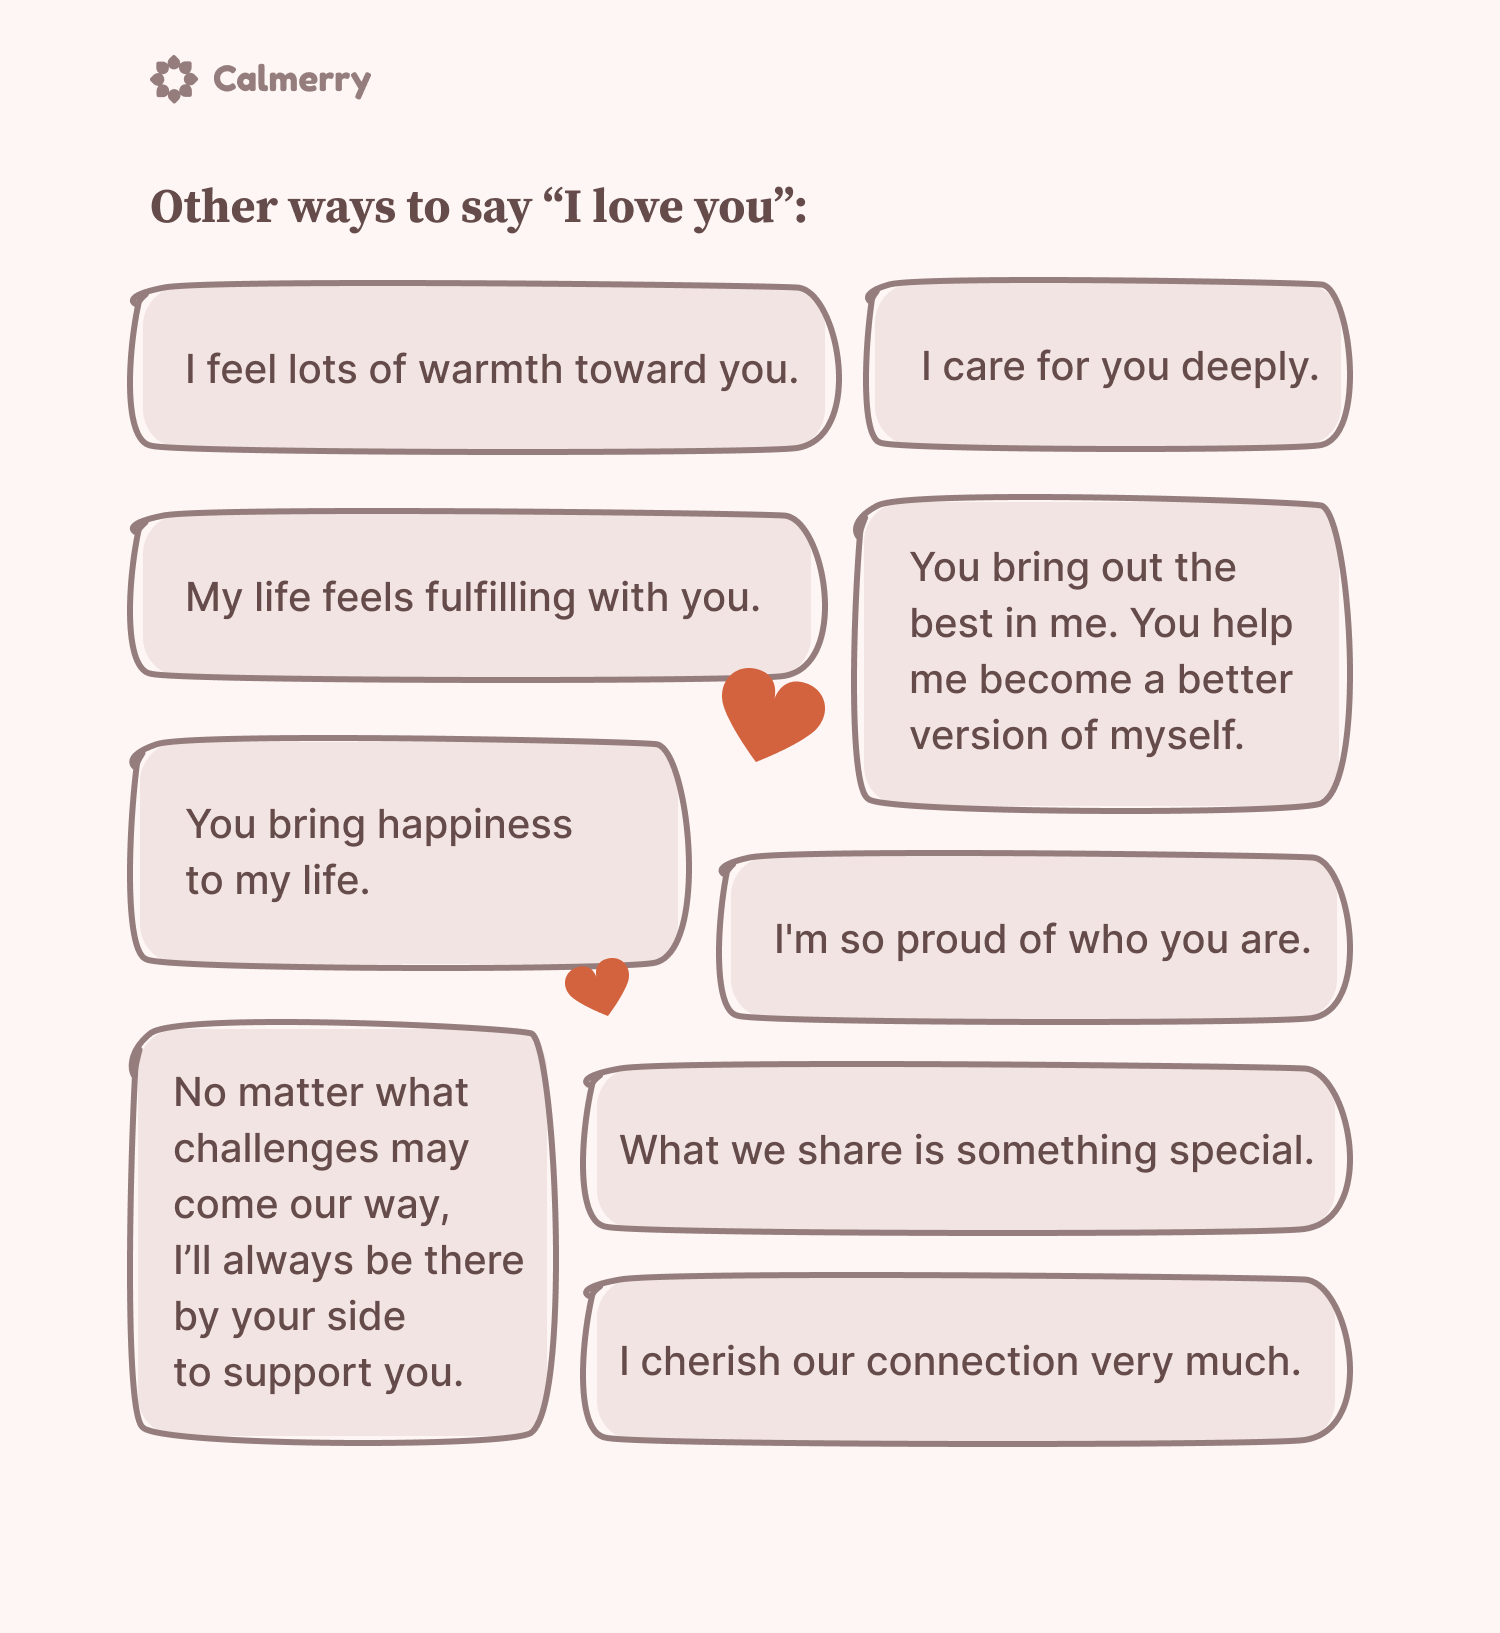 Other ways to say “I love you” list